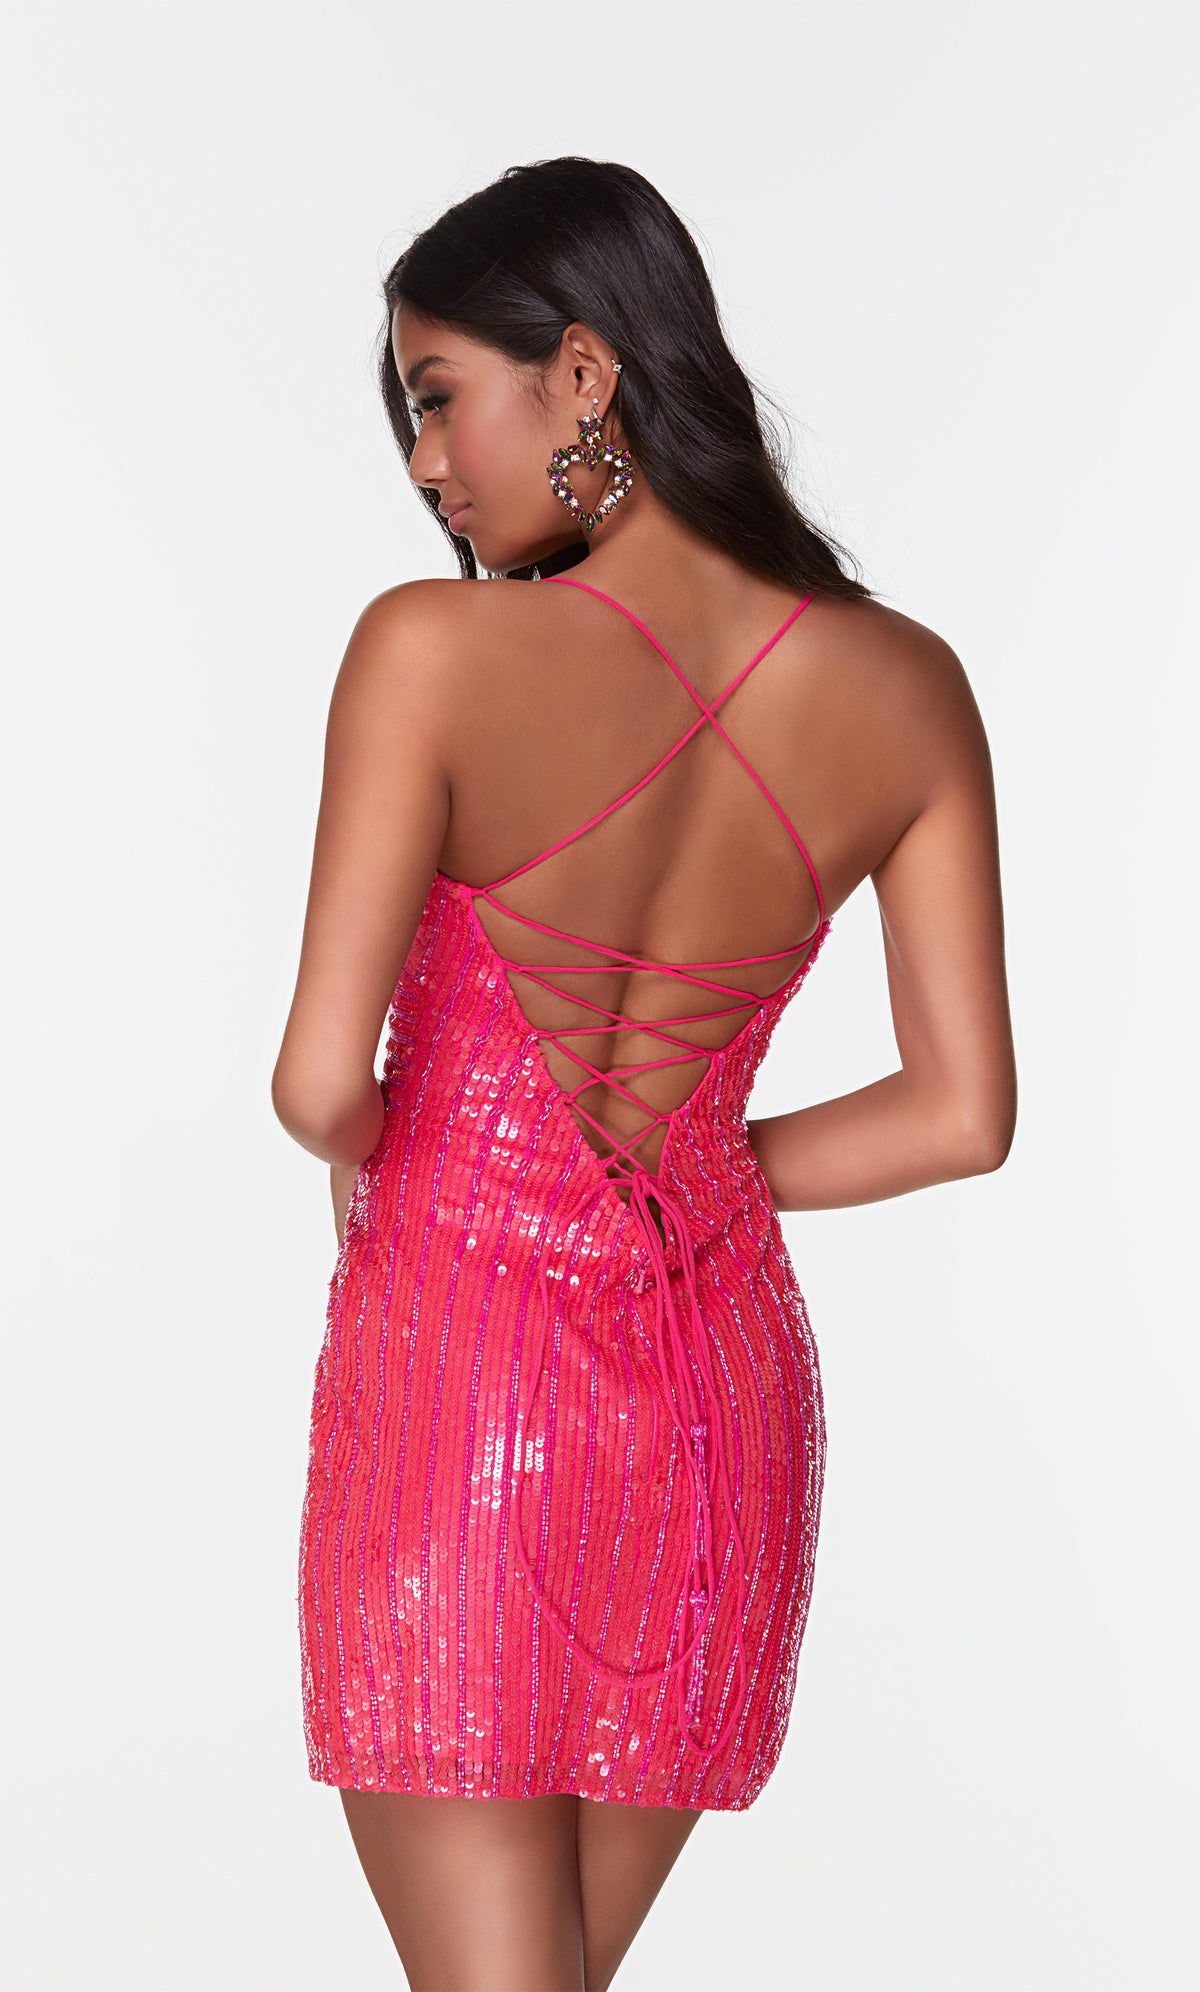 Short hot pink beaded mini dress with a strappy, lace-up back.